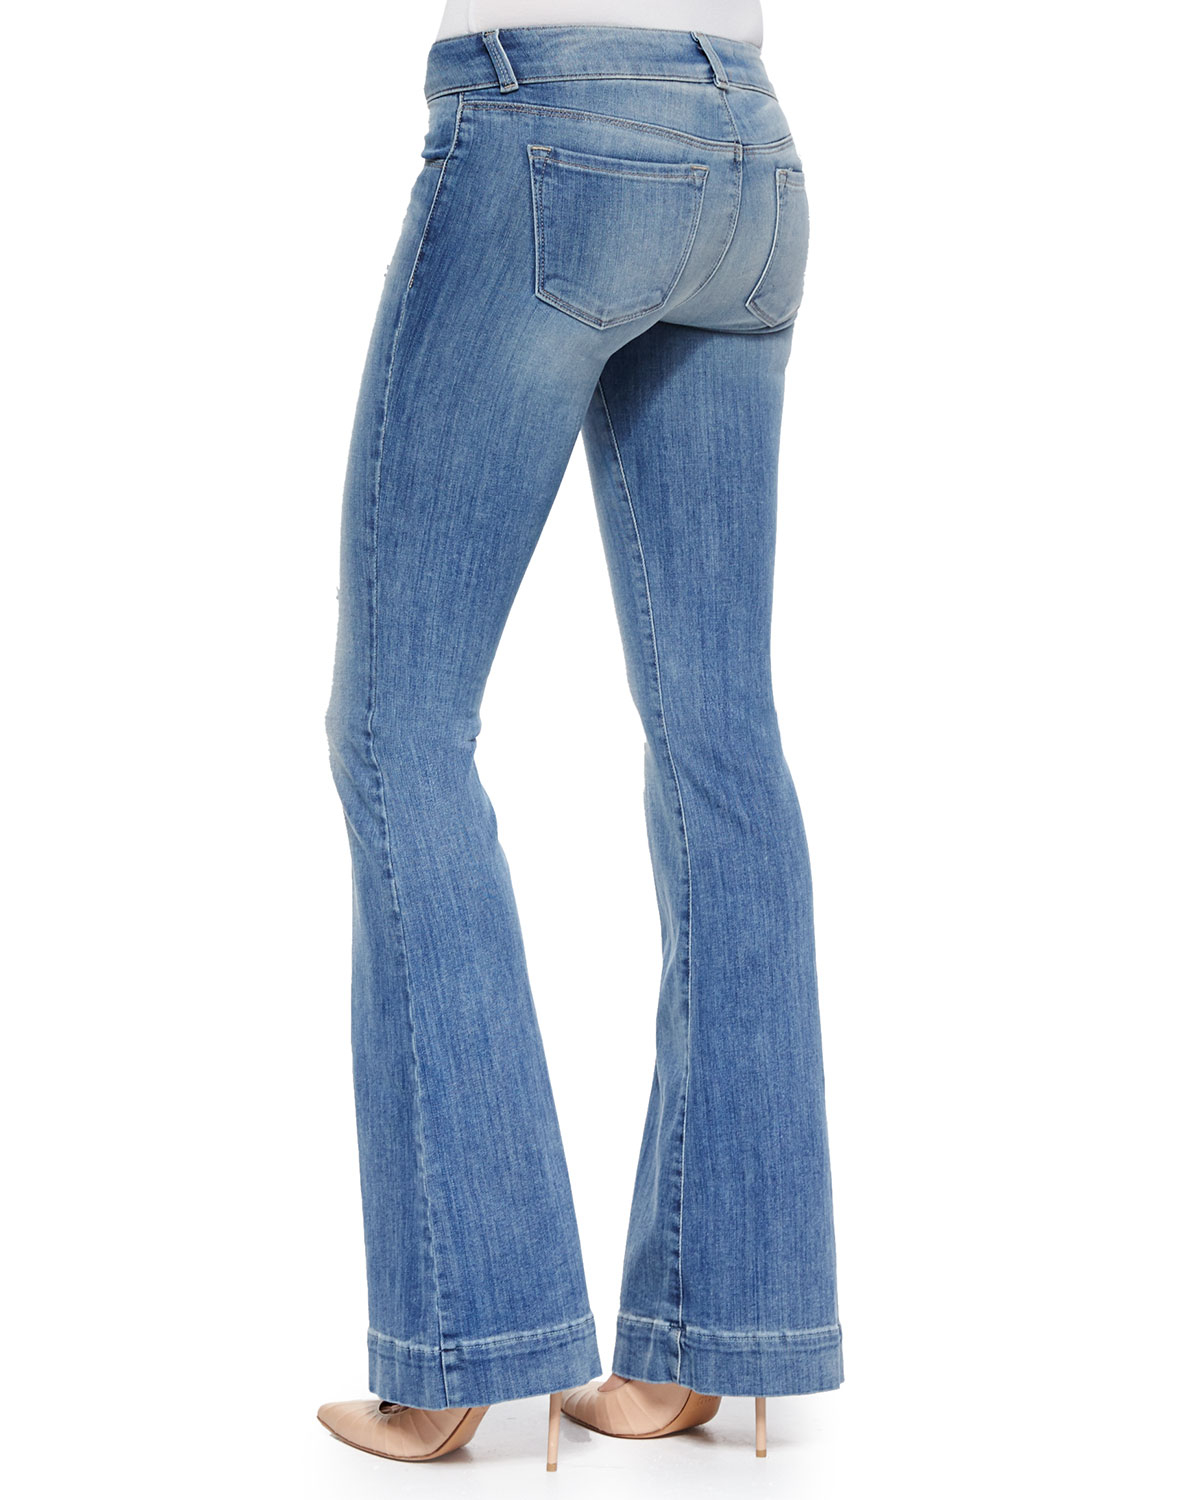 J brand Love Story Faded Distressed Flare Jeans in Blue (MESMERIZE) | Lyst